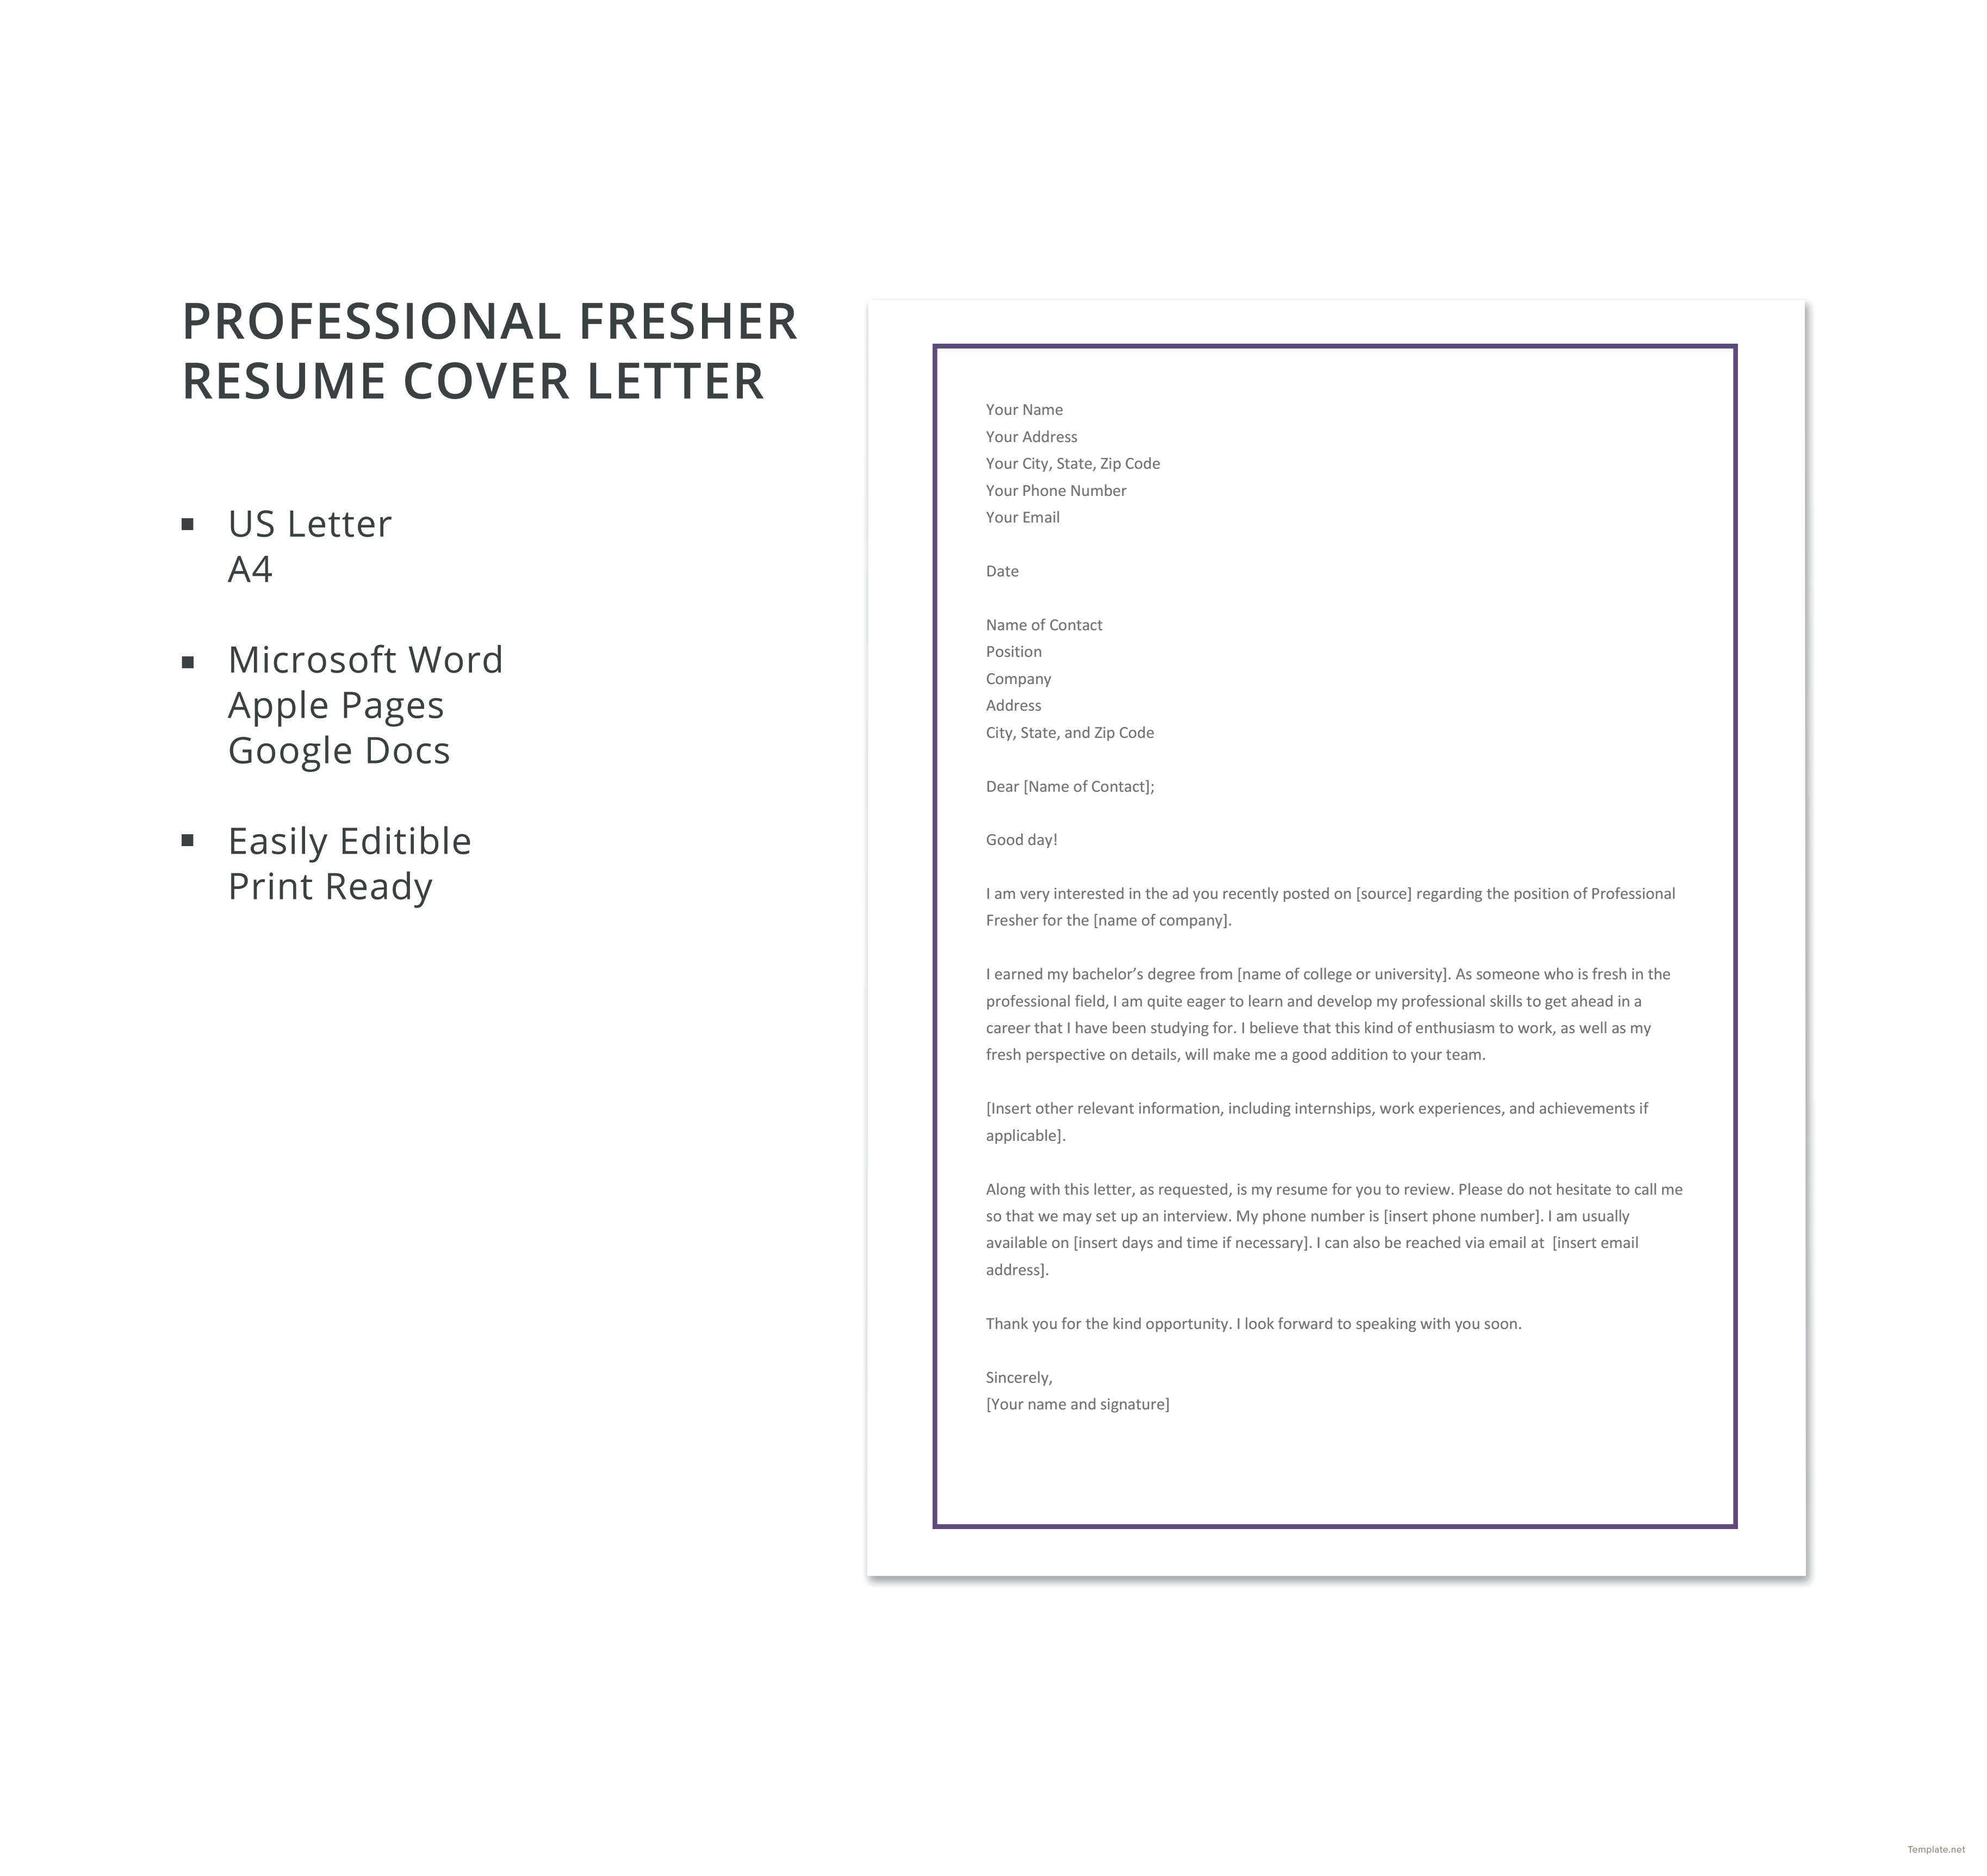 how to prepare cover letter for fresher resume